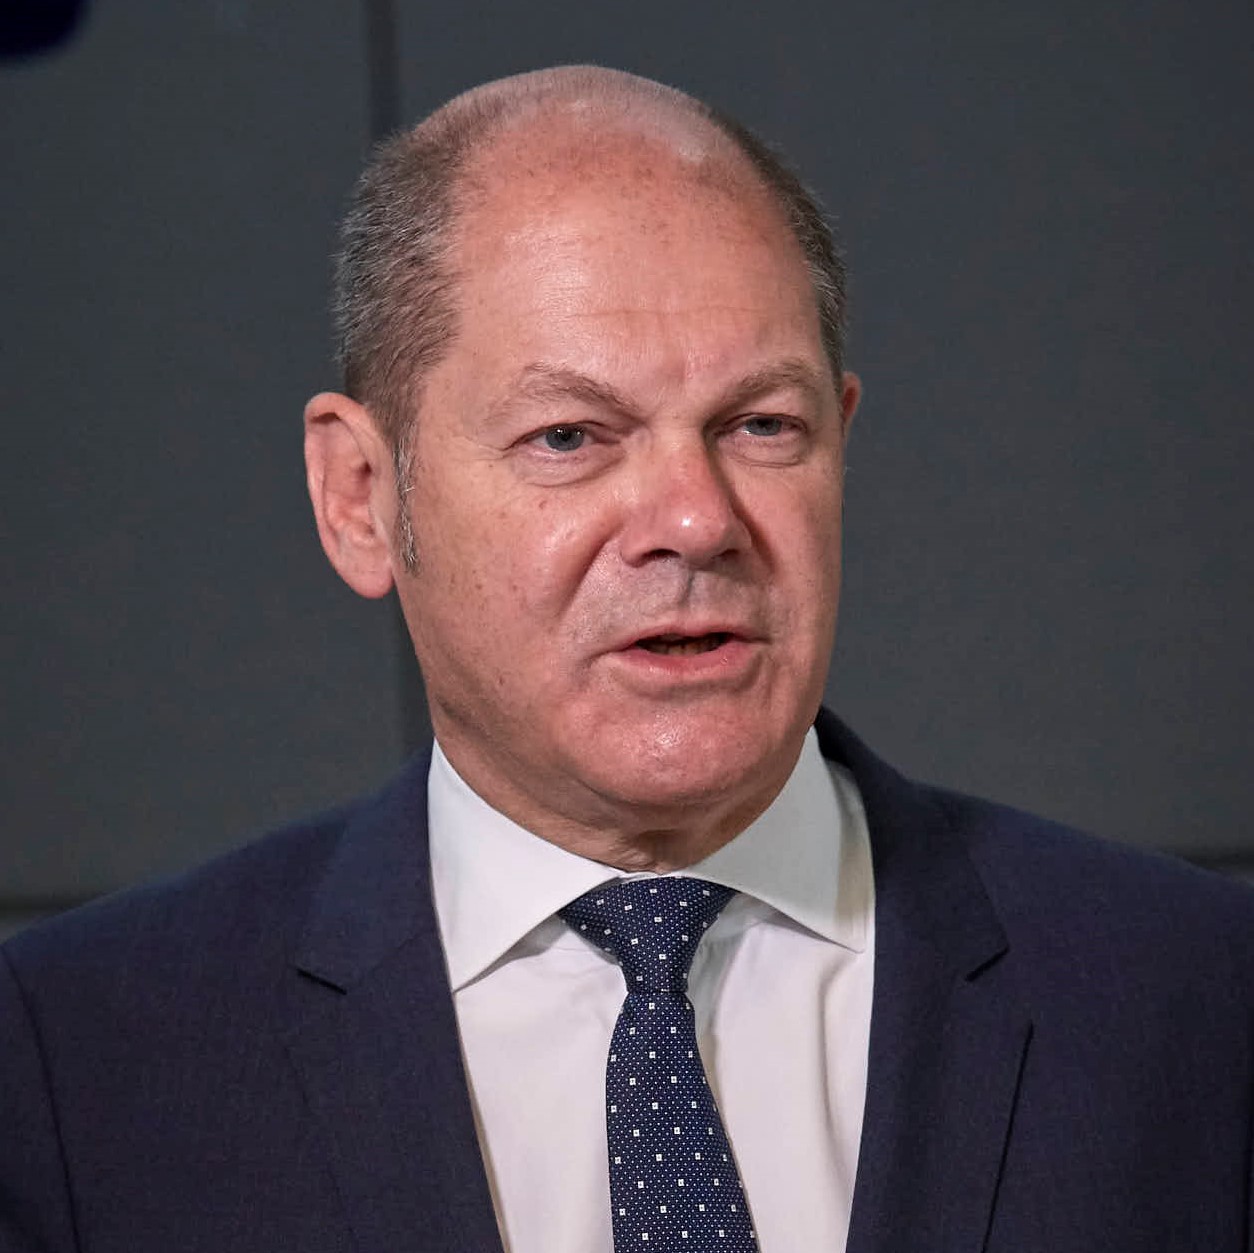 Olaf Scholz, Germany’s Federal Minister of Finance and Vice Chancellor